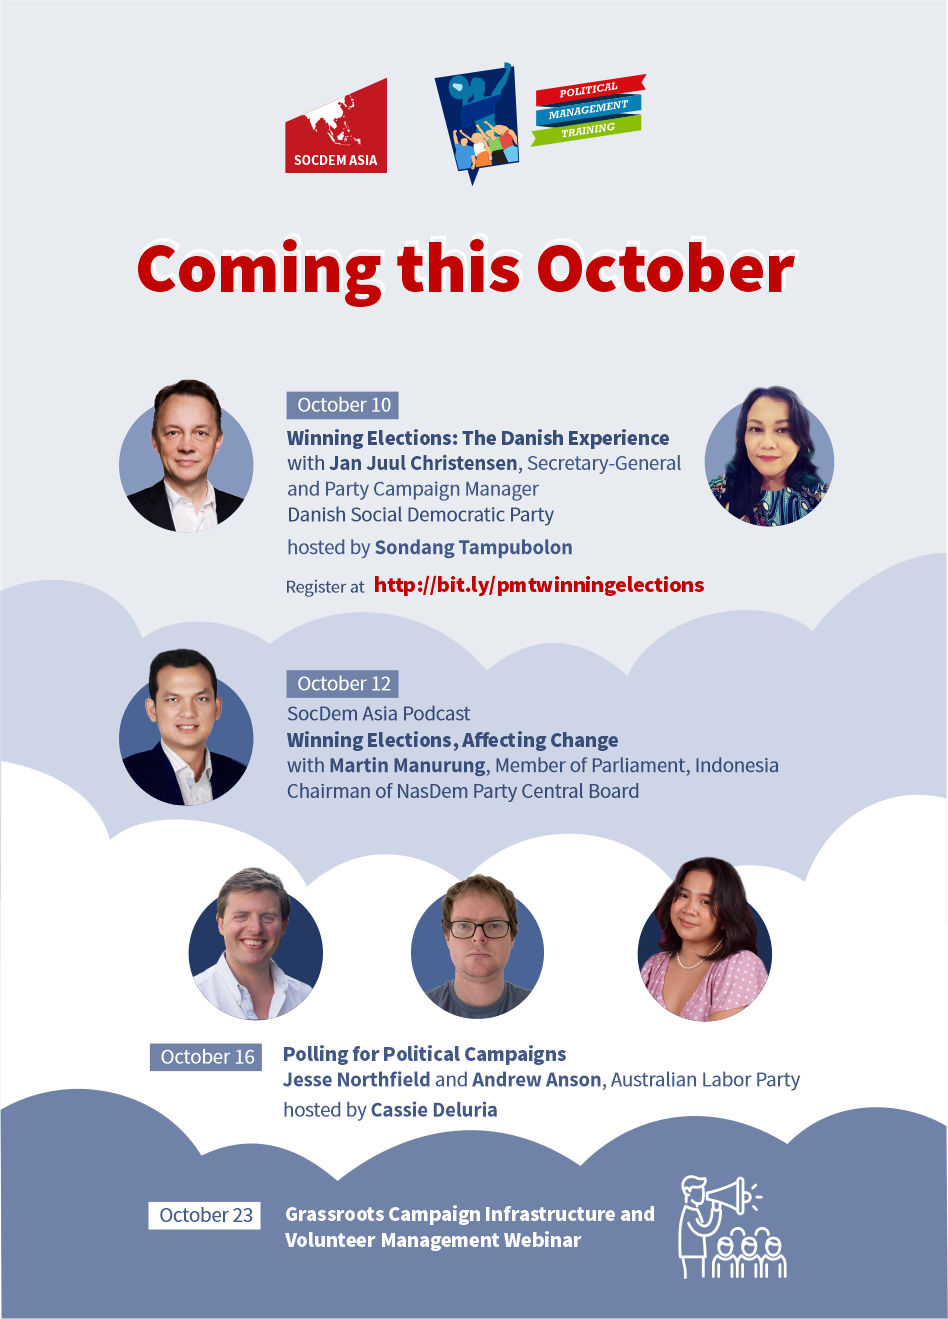 Upcoming events this October for our Political Management Training for Young Progressives (PMT)